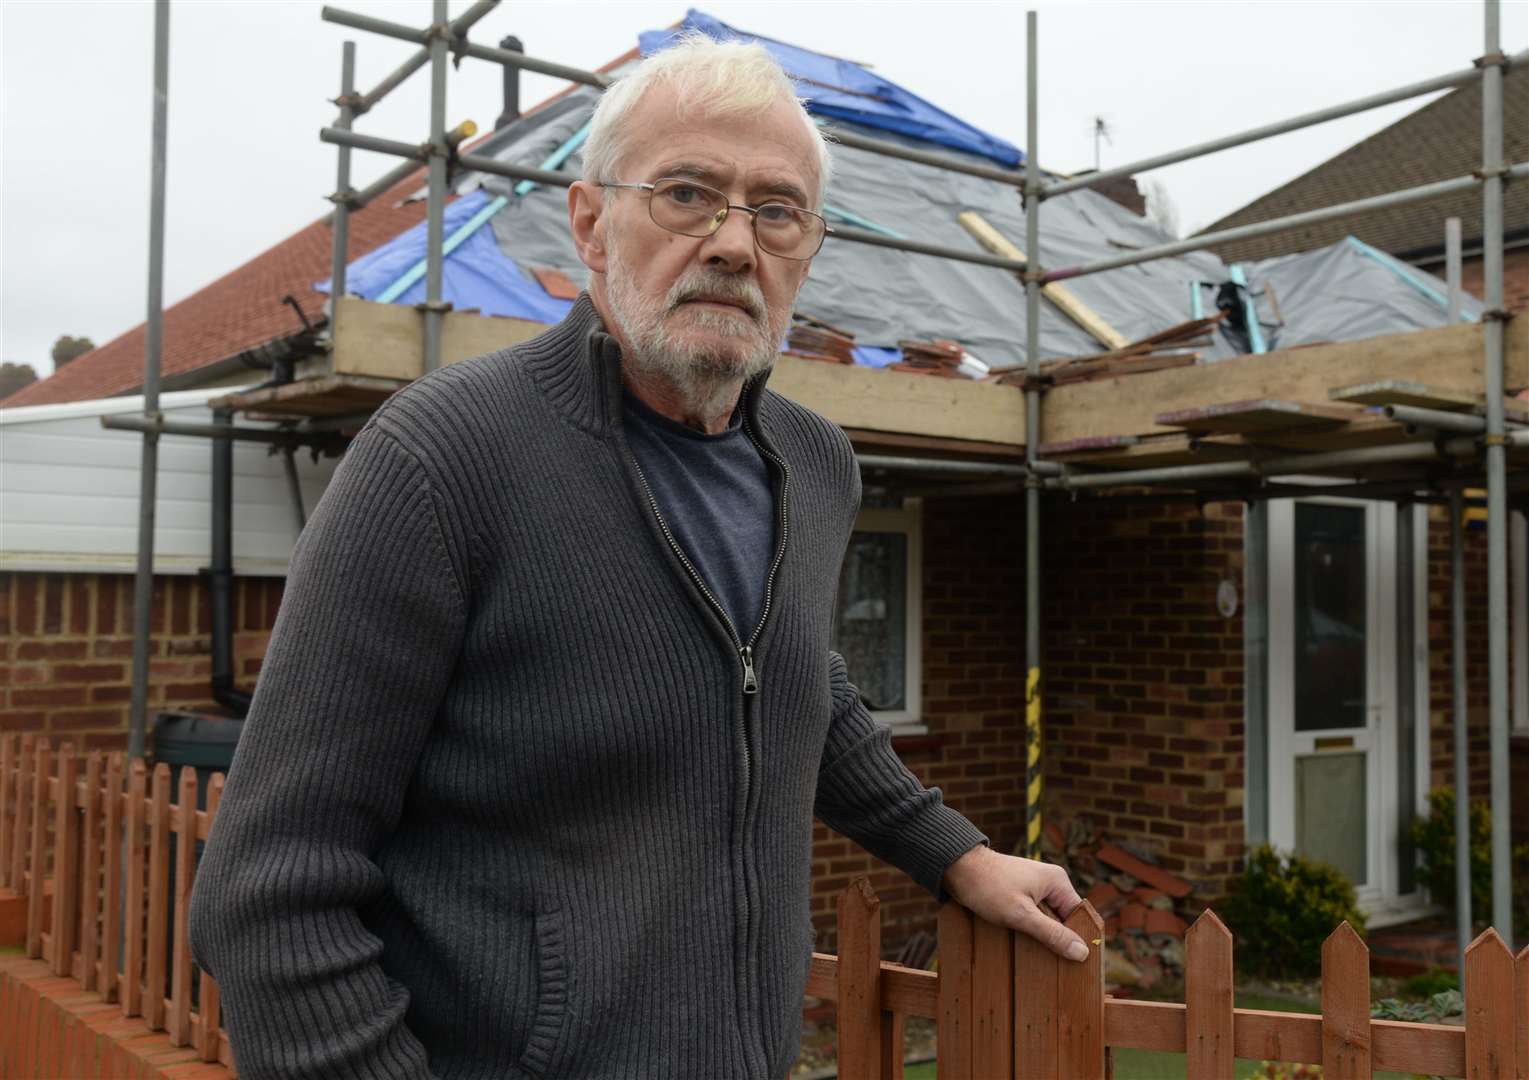 Malcolm Bishop is being helped by the genuine company to help replace the roof after swindlers ripped him off and left his home open to the elements